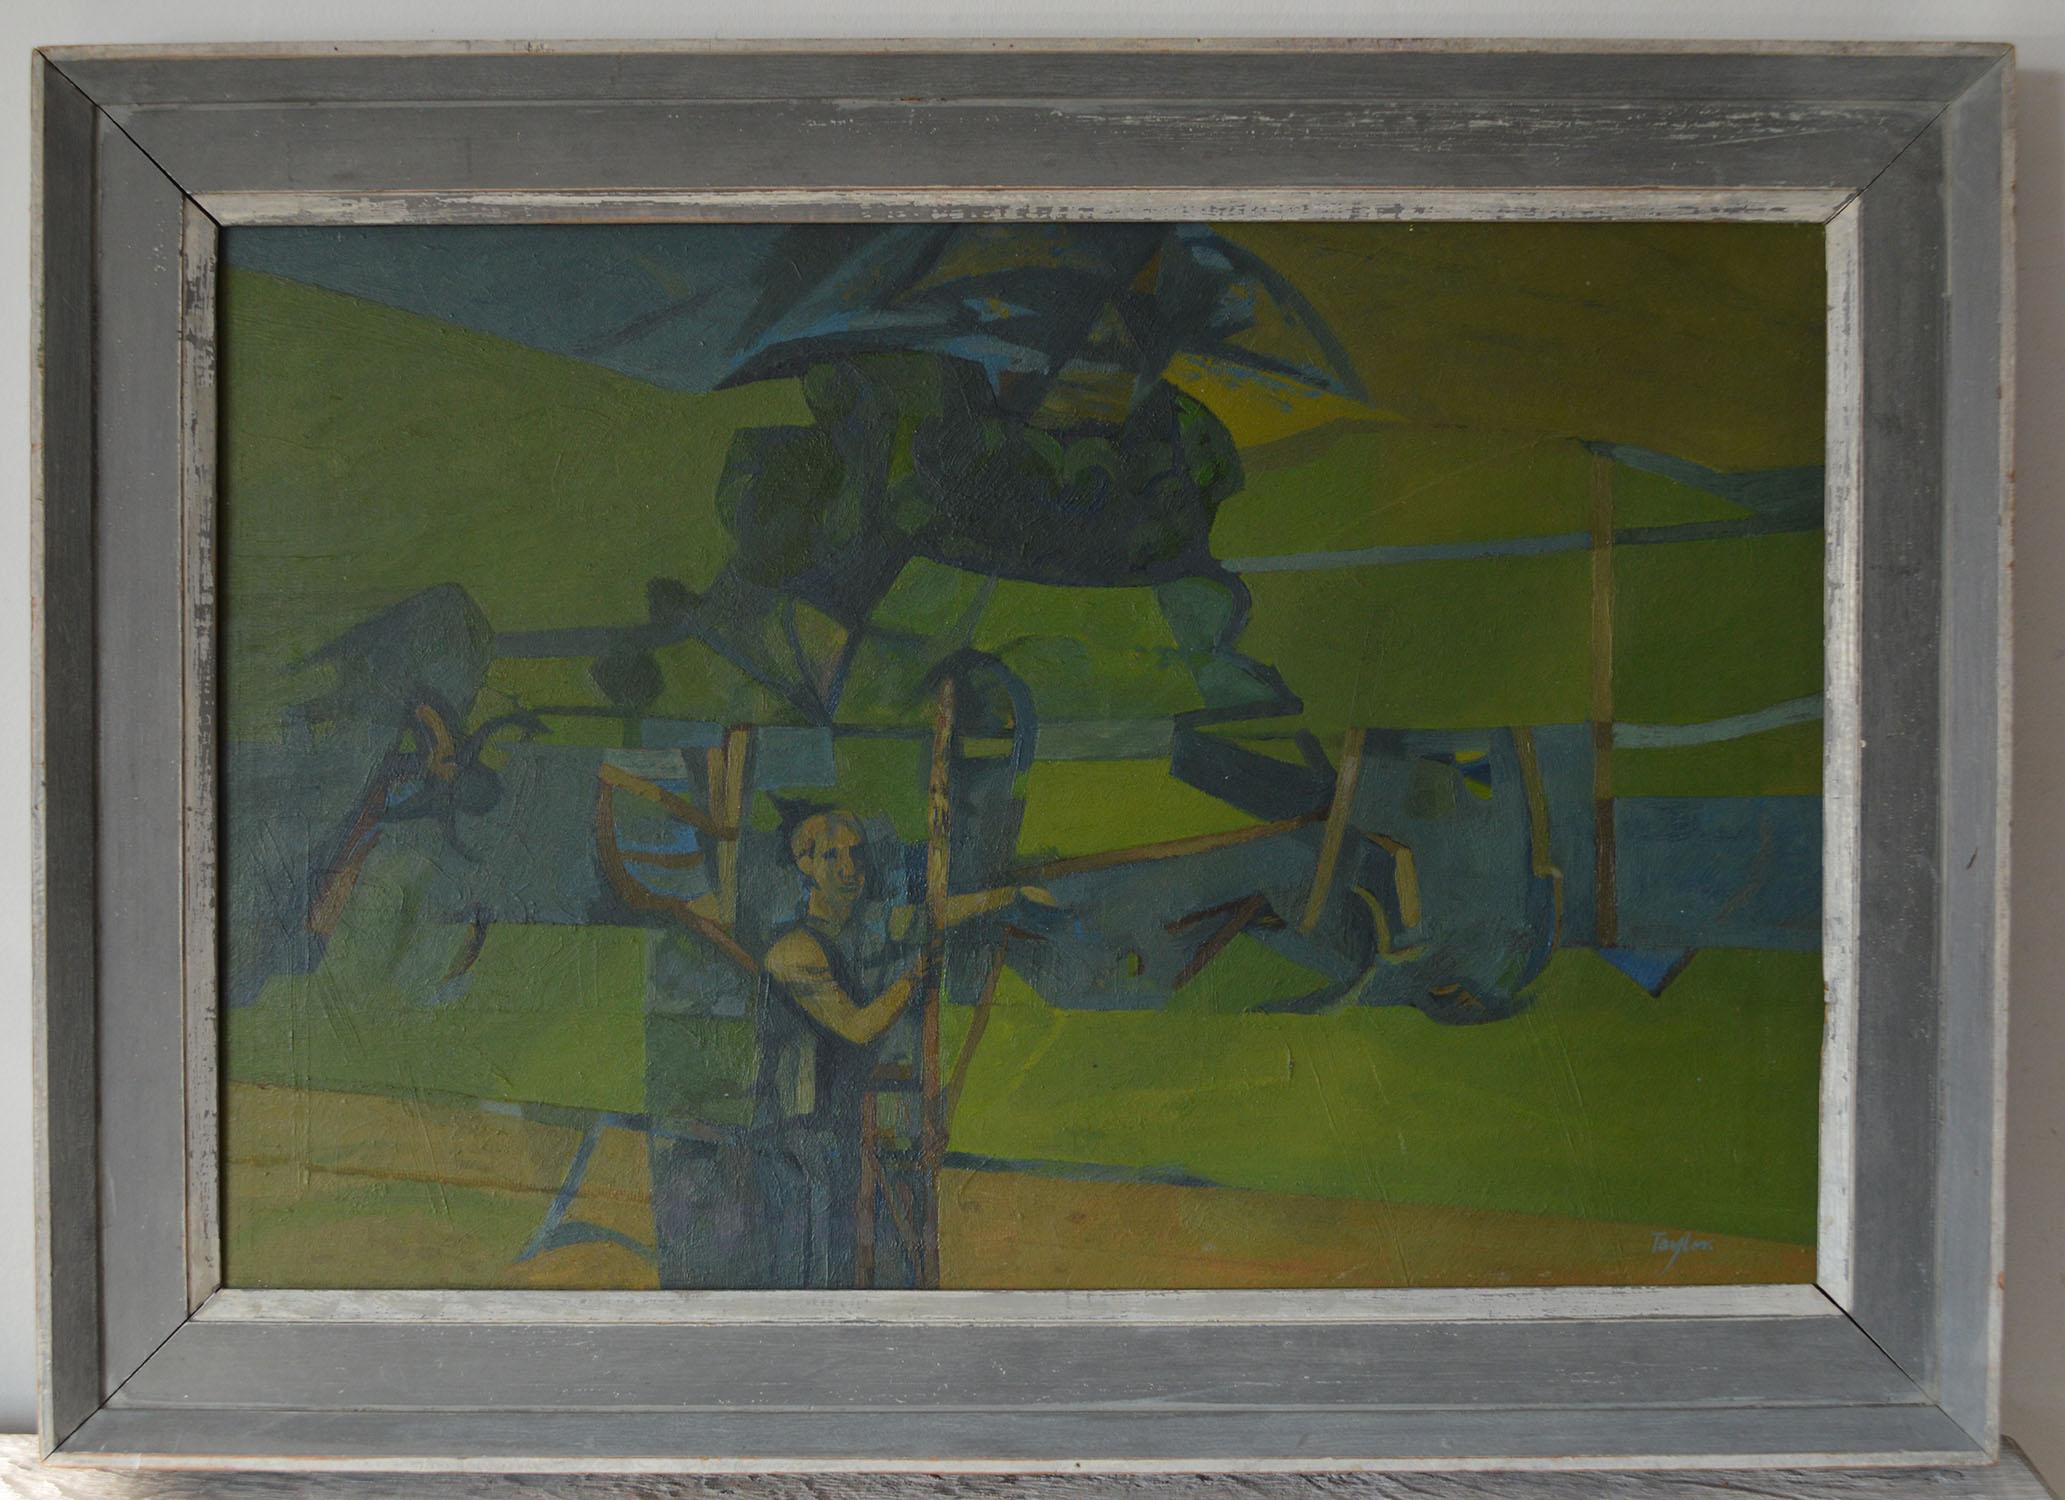 Great painting of a figure in an abstract landscape

By Yorkshire artist A. C. Taylor. In the style of Keith Vaughan.

Wonderful green colours 

Original painted frame

Oil on board.

Signed bottom right

The measurement given below is